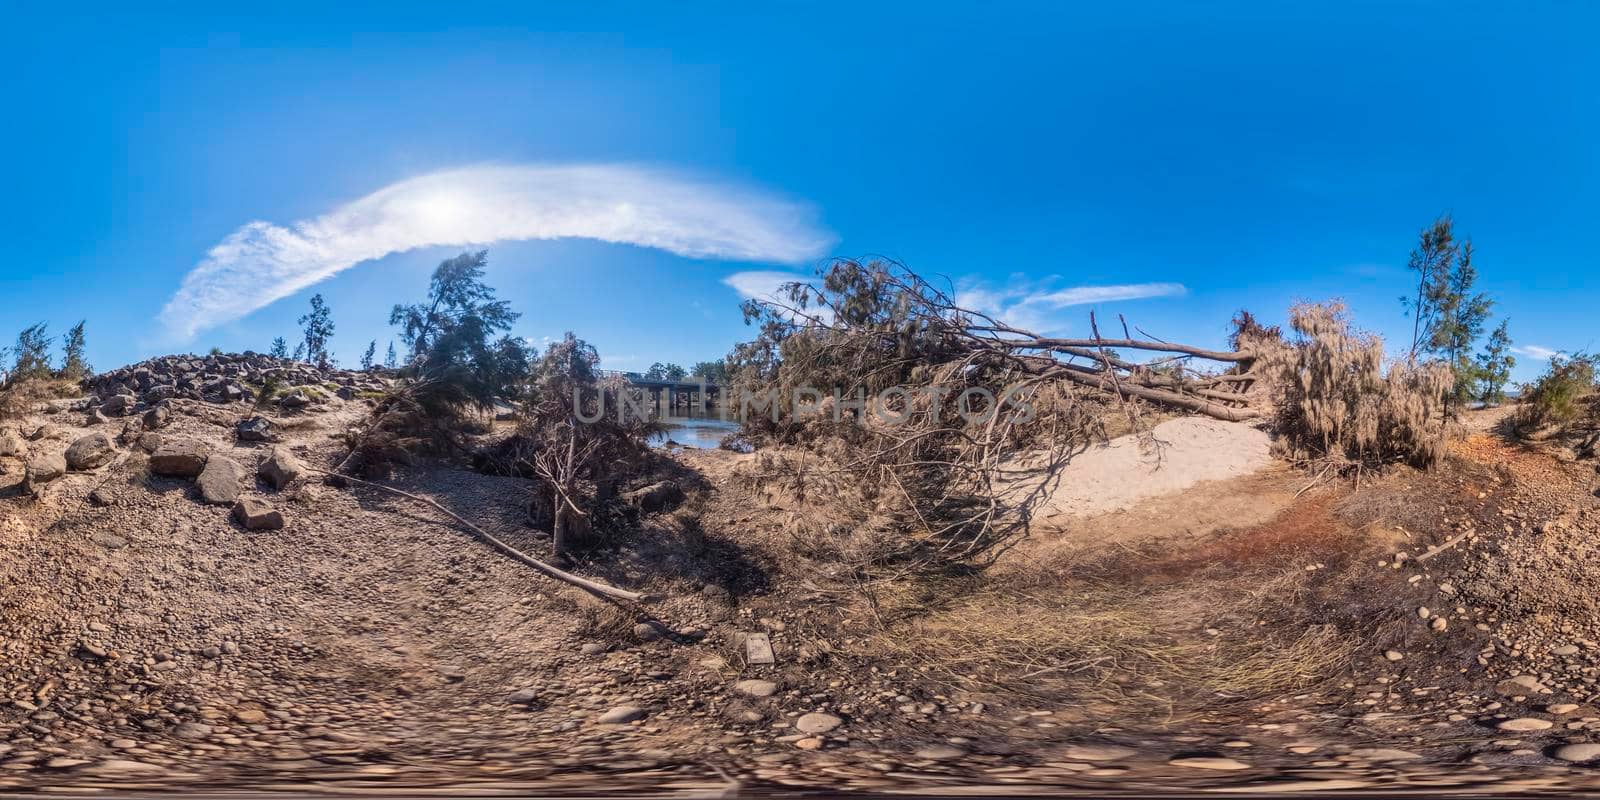 Spherical panoramic photograph of the Nepean River and Bridge in regional Australia by WittkePhotos